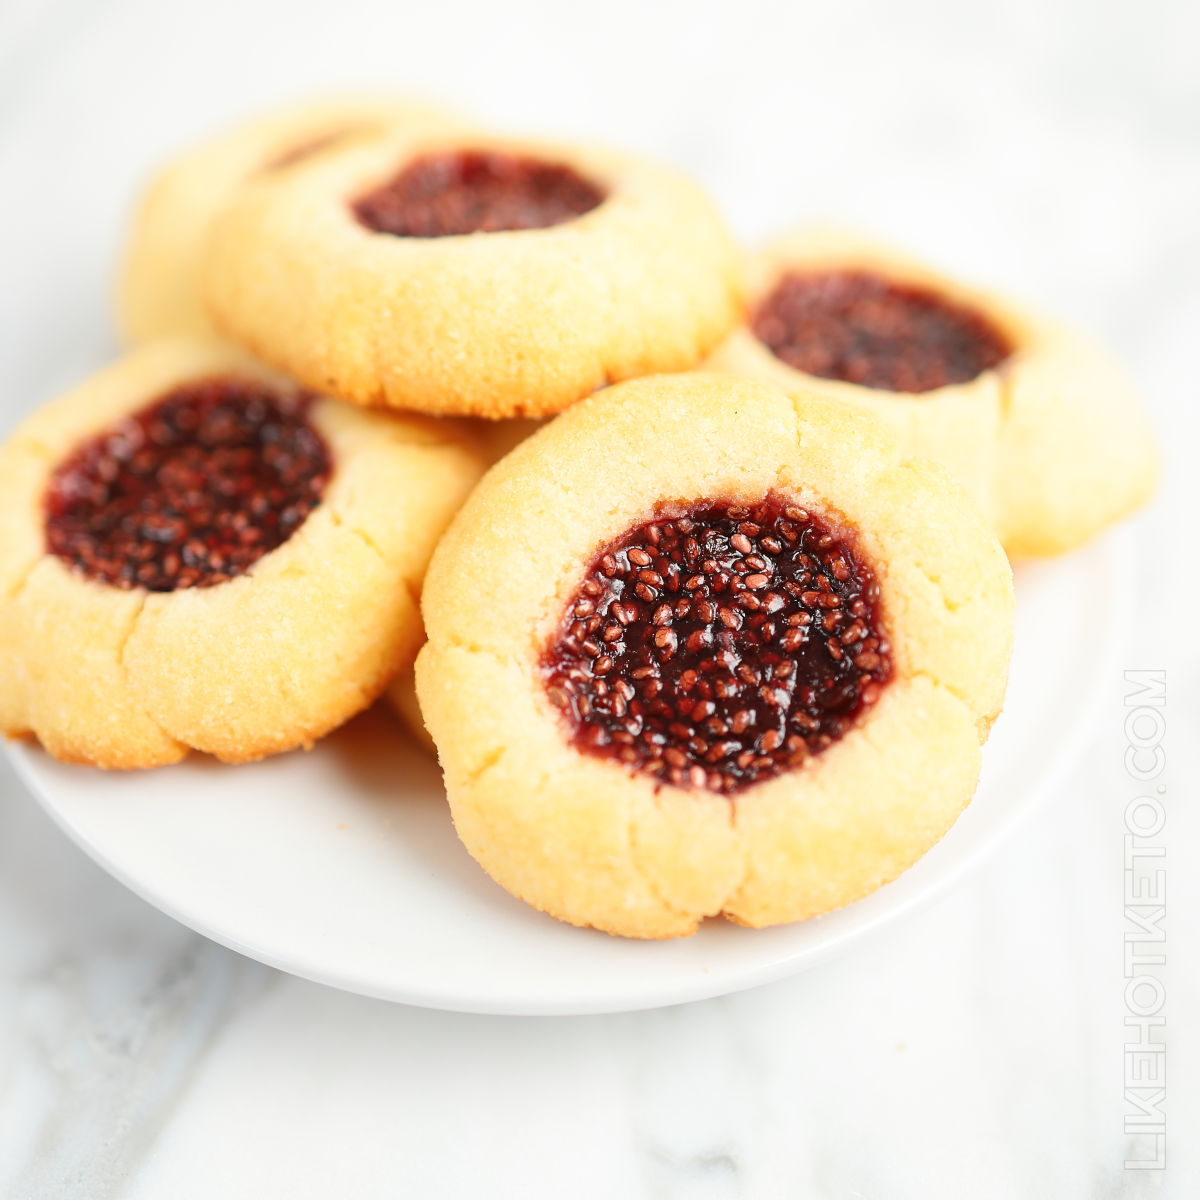 Sugar-free jam thumbprint cookies piled up on a white plate.